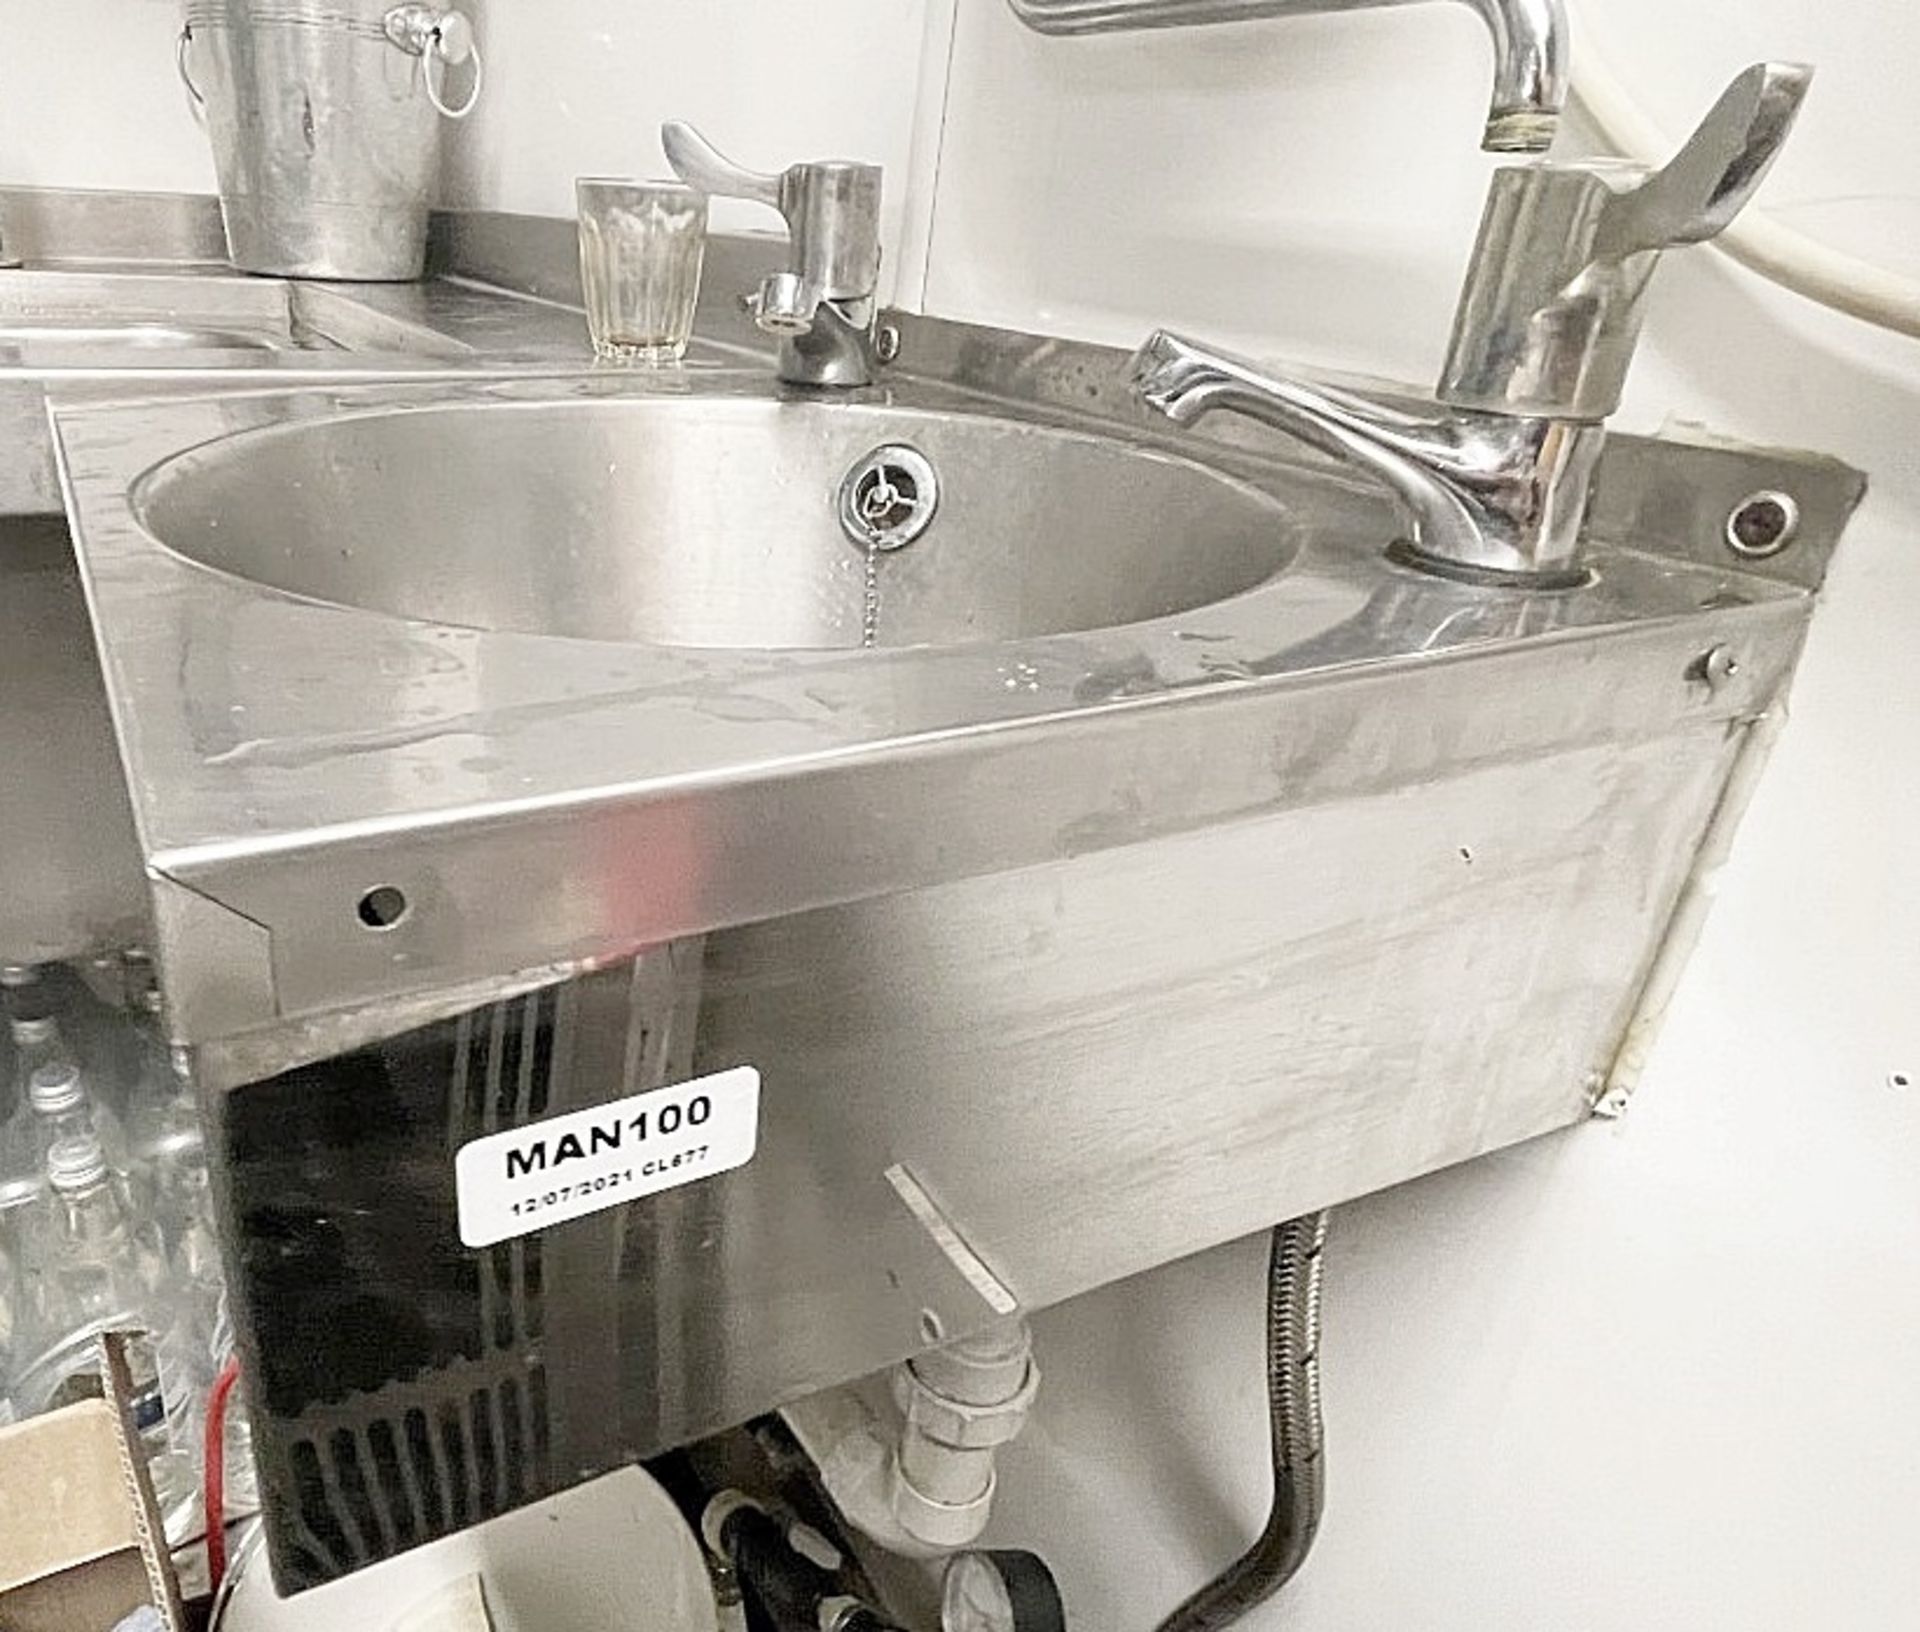 1 x Commercial Stainless Steel Wall Mounted Washing Station - Ref: MAN100 - CL677 - Location: London